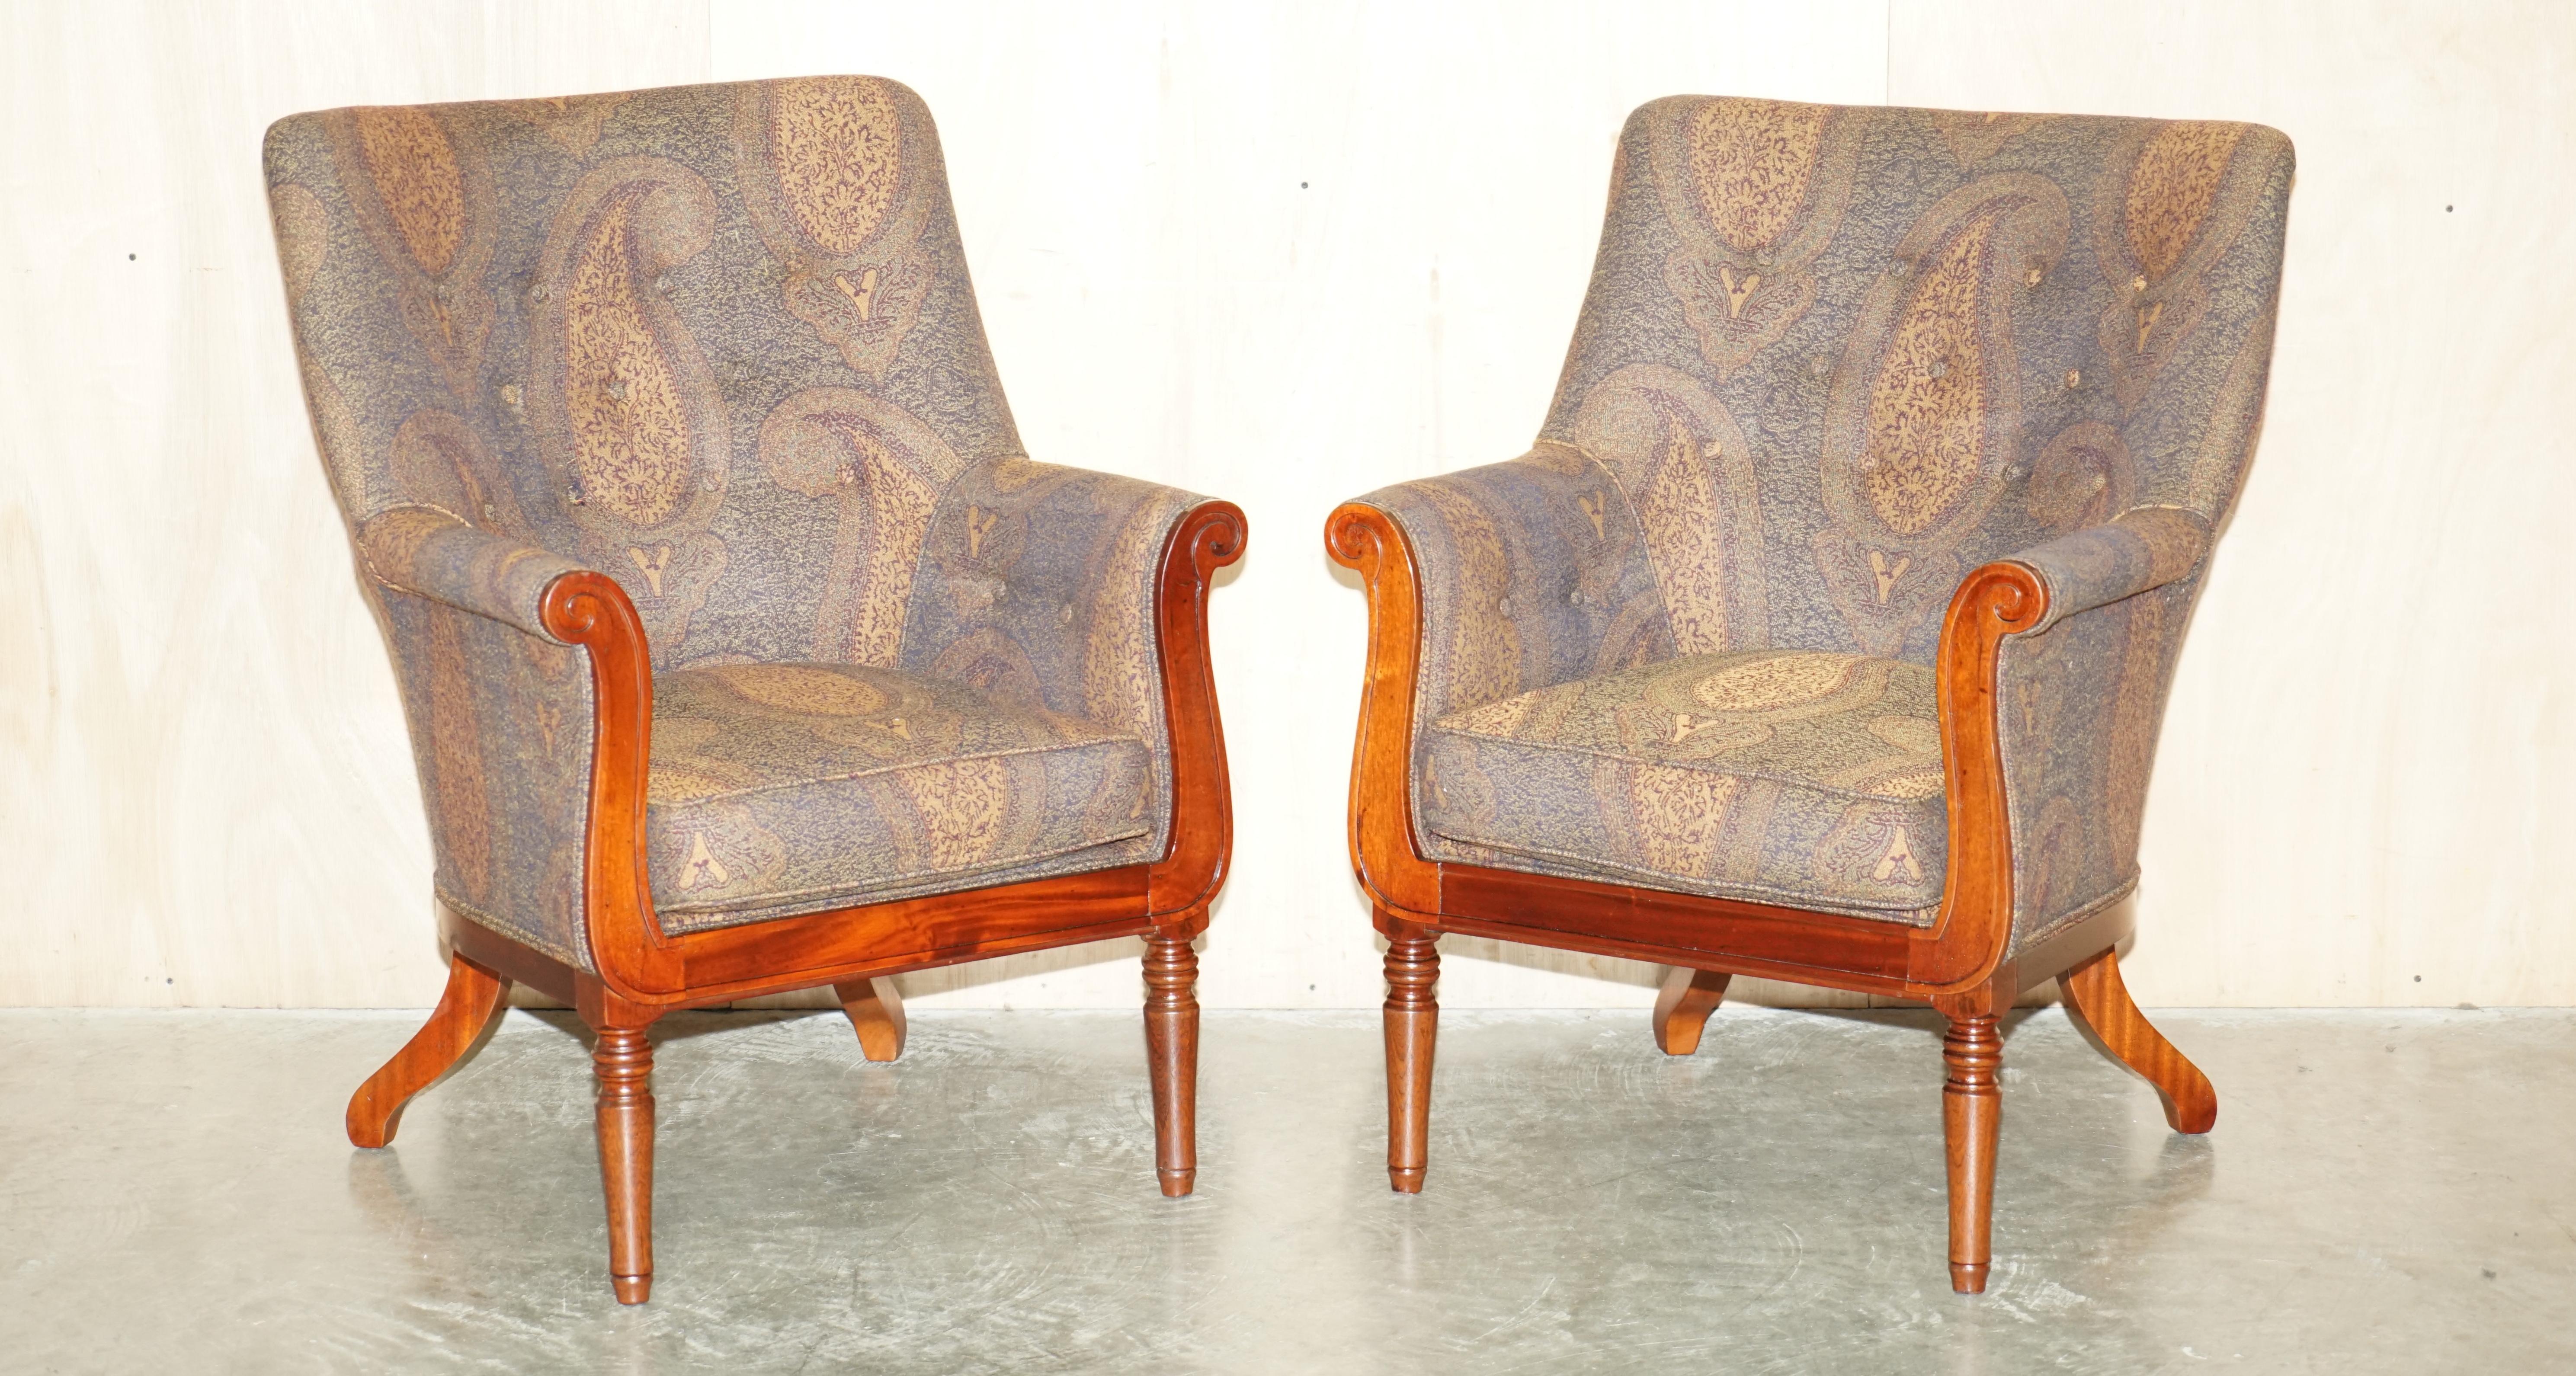 Royal House Antiques

Royal House Antiques is delighted to offer for sale this stunning pair of George Smith William IV RRP £16,000 Library armchairs with stunning upholstery 

Please note the delivery fee listed is just a guide, it covers within